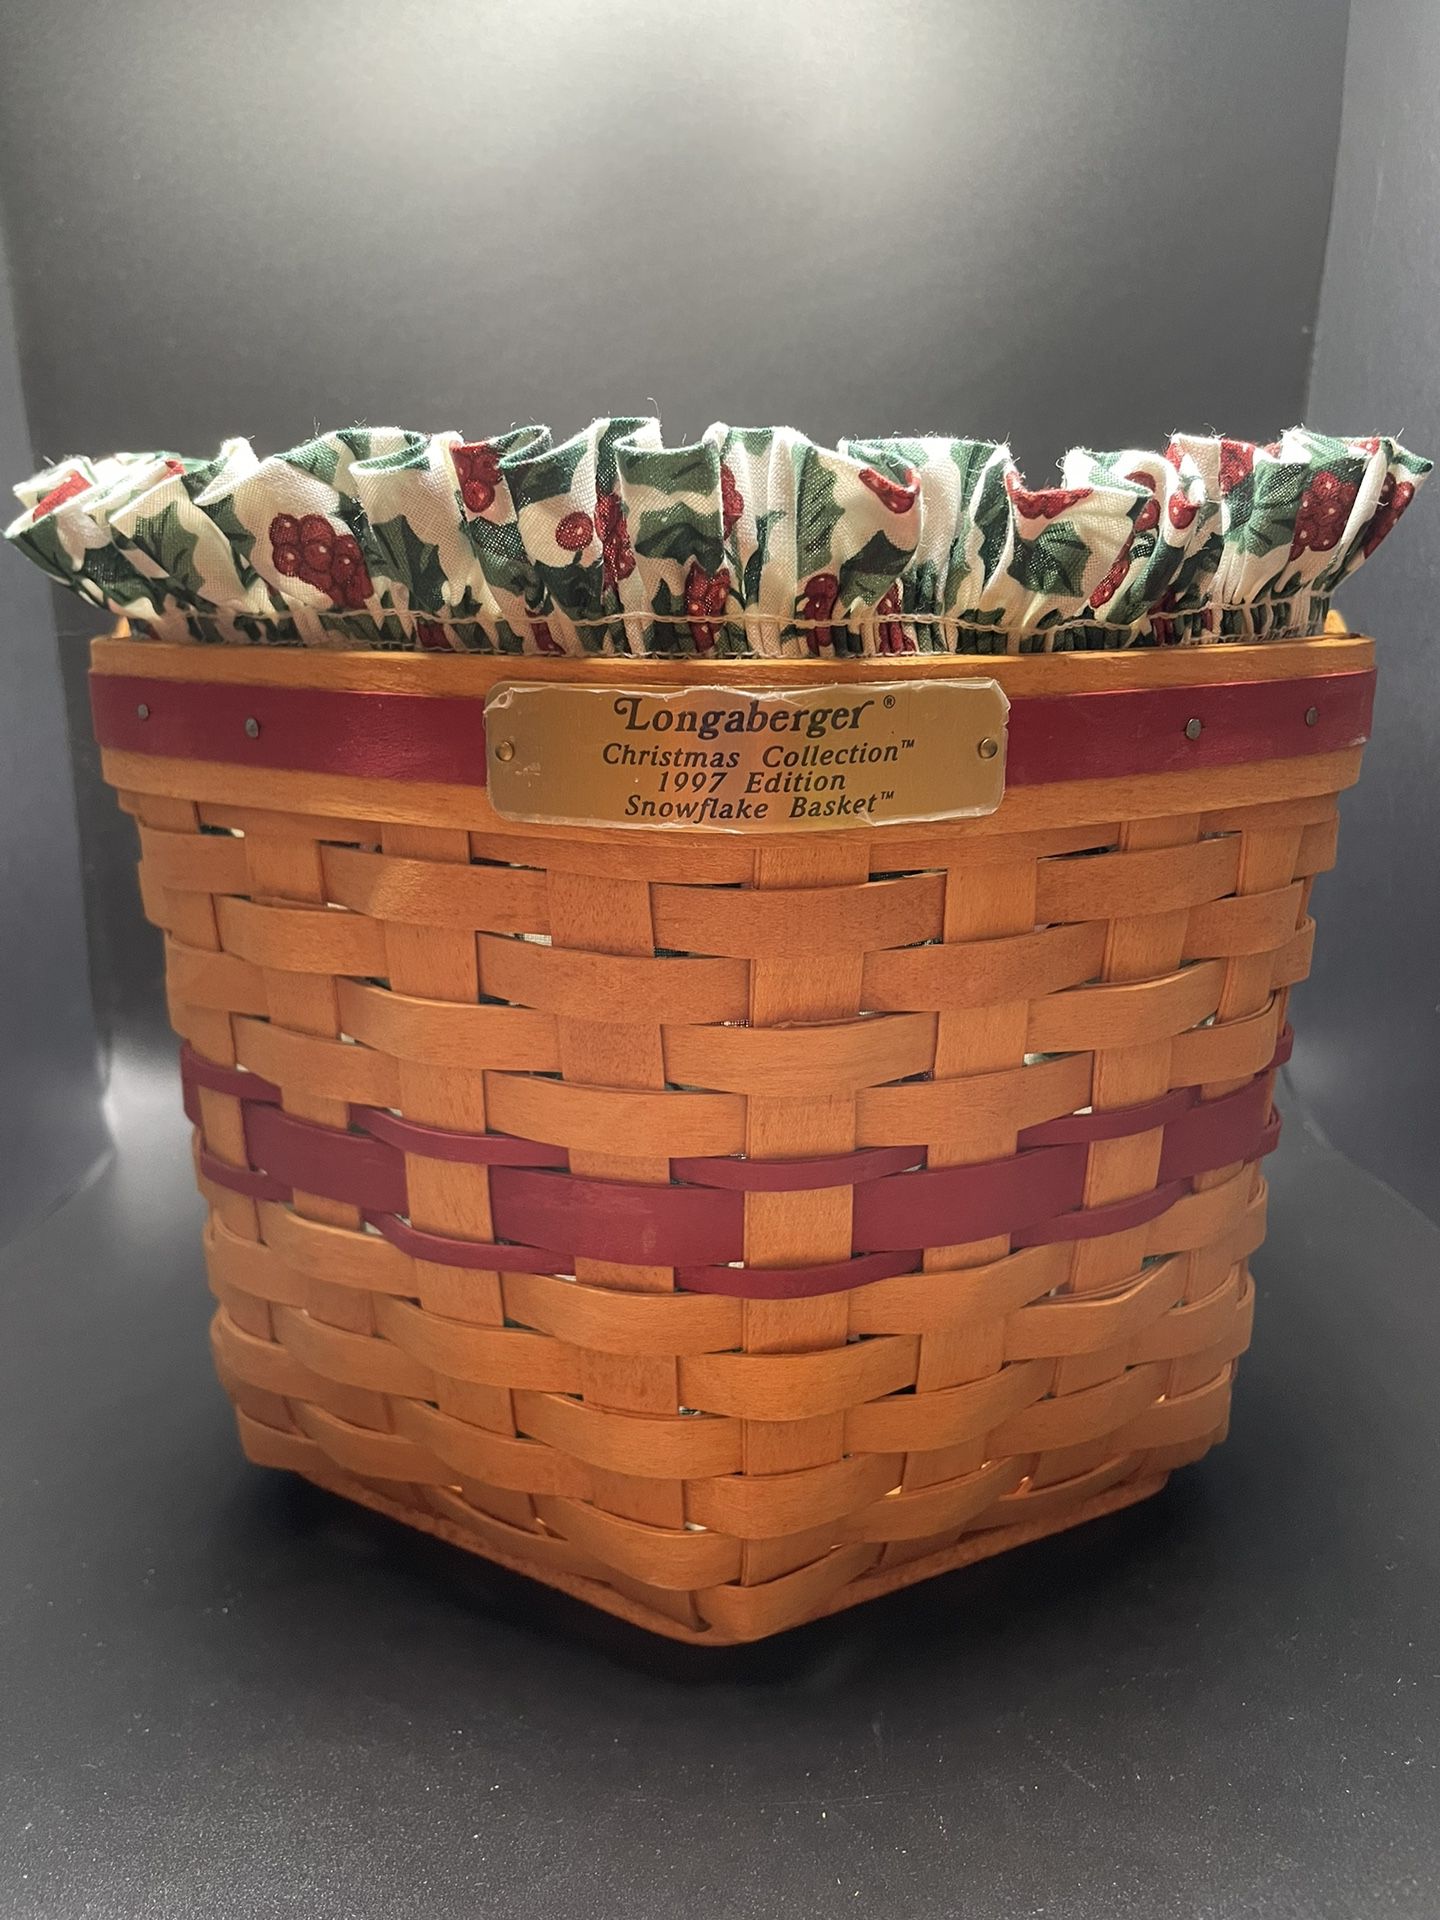 1987 Longaberger Snowflake Basket Christmas Edition With Fabric And Plastic Liners